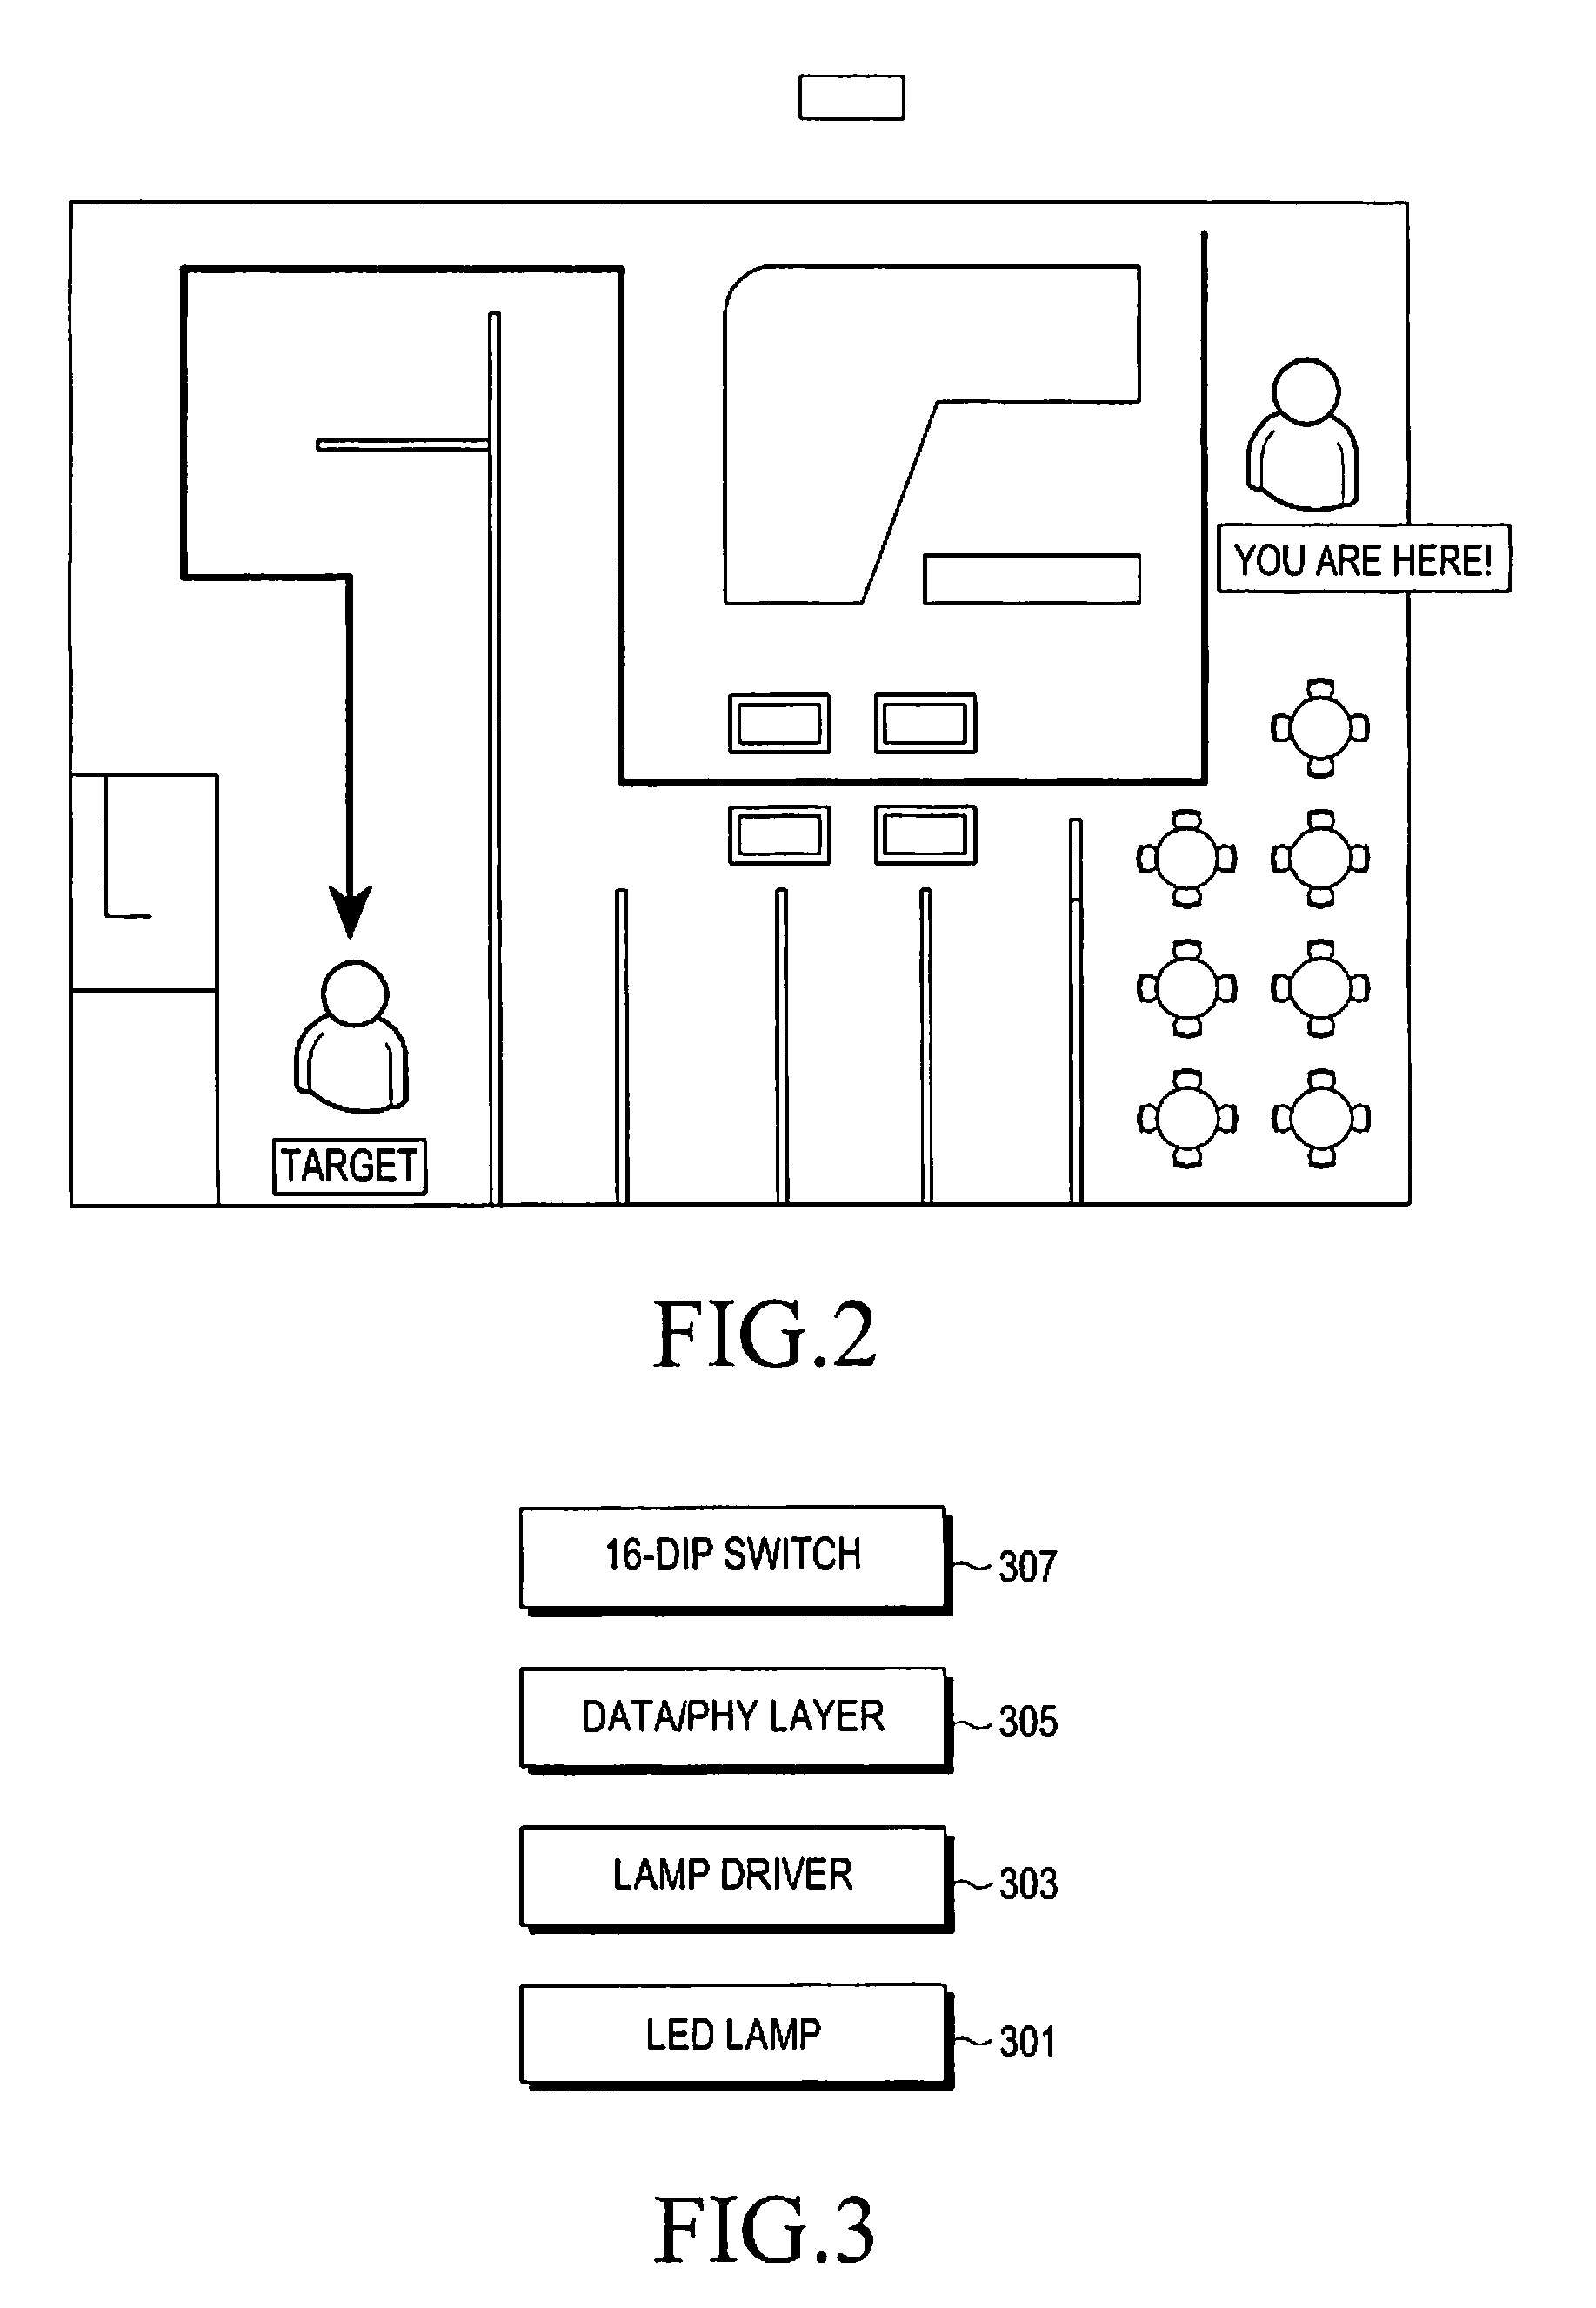 Indoor navigation method and system using illumination lamps